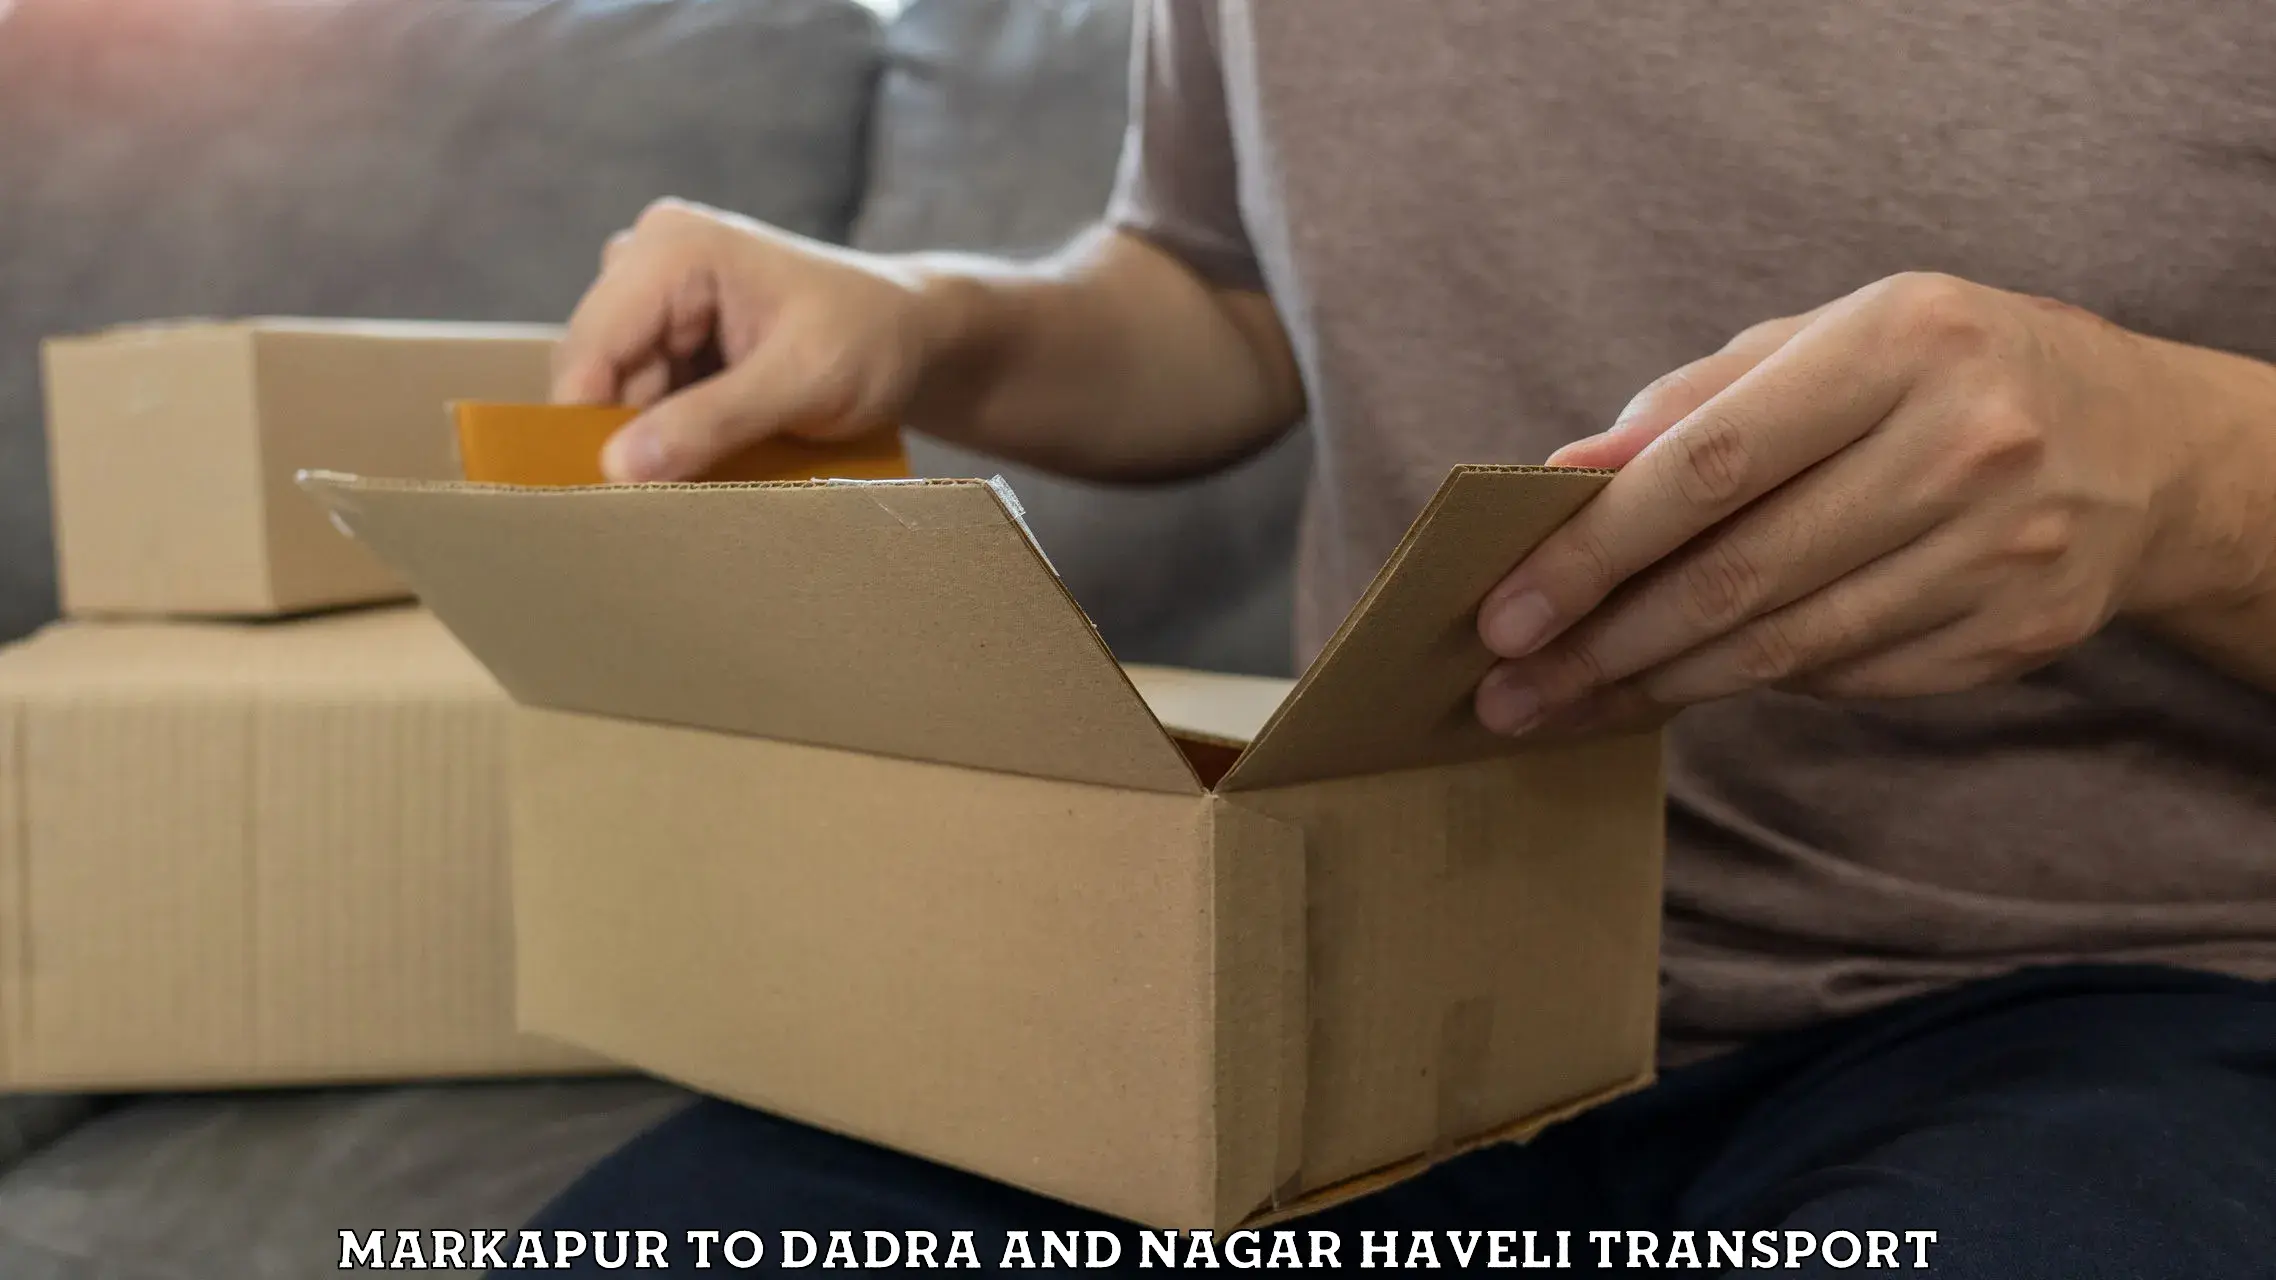 Container transport service Markapur to Dadra and Nagar Haveli